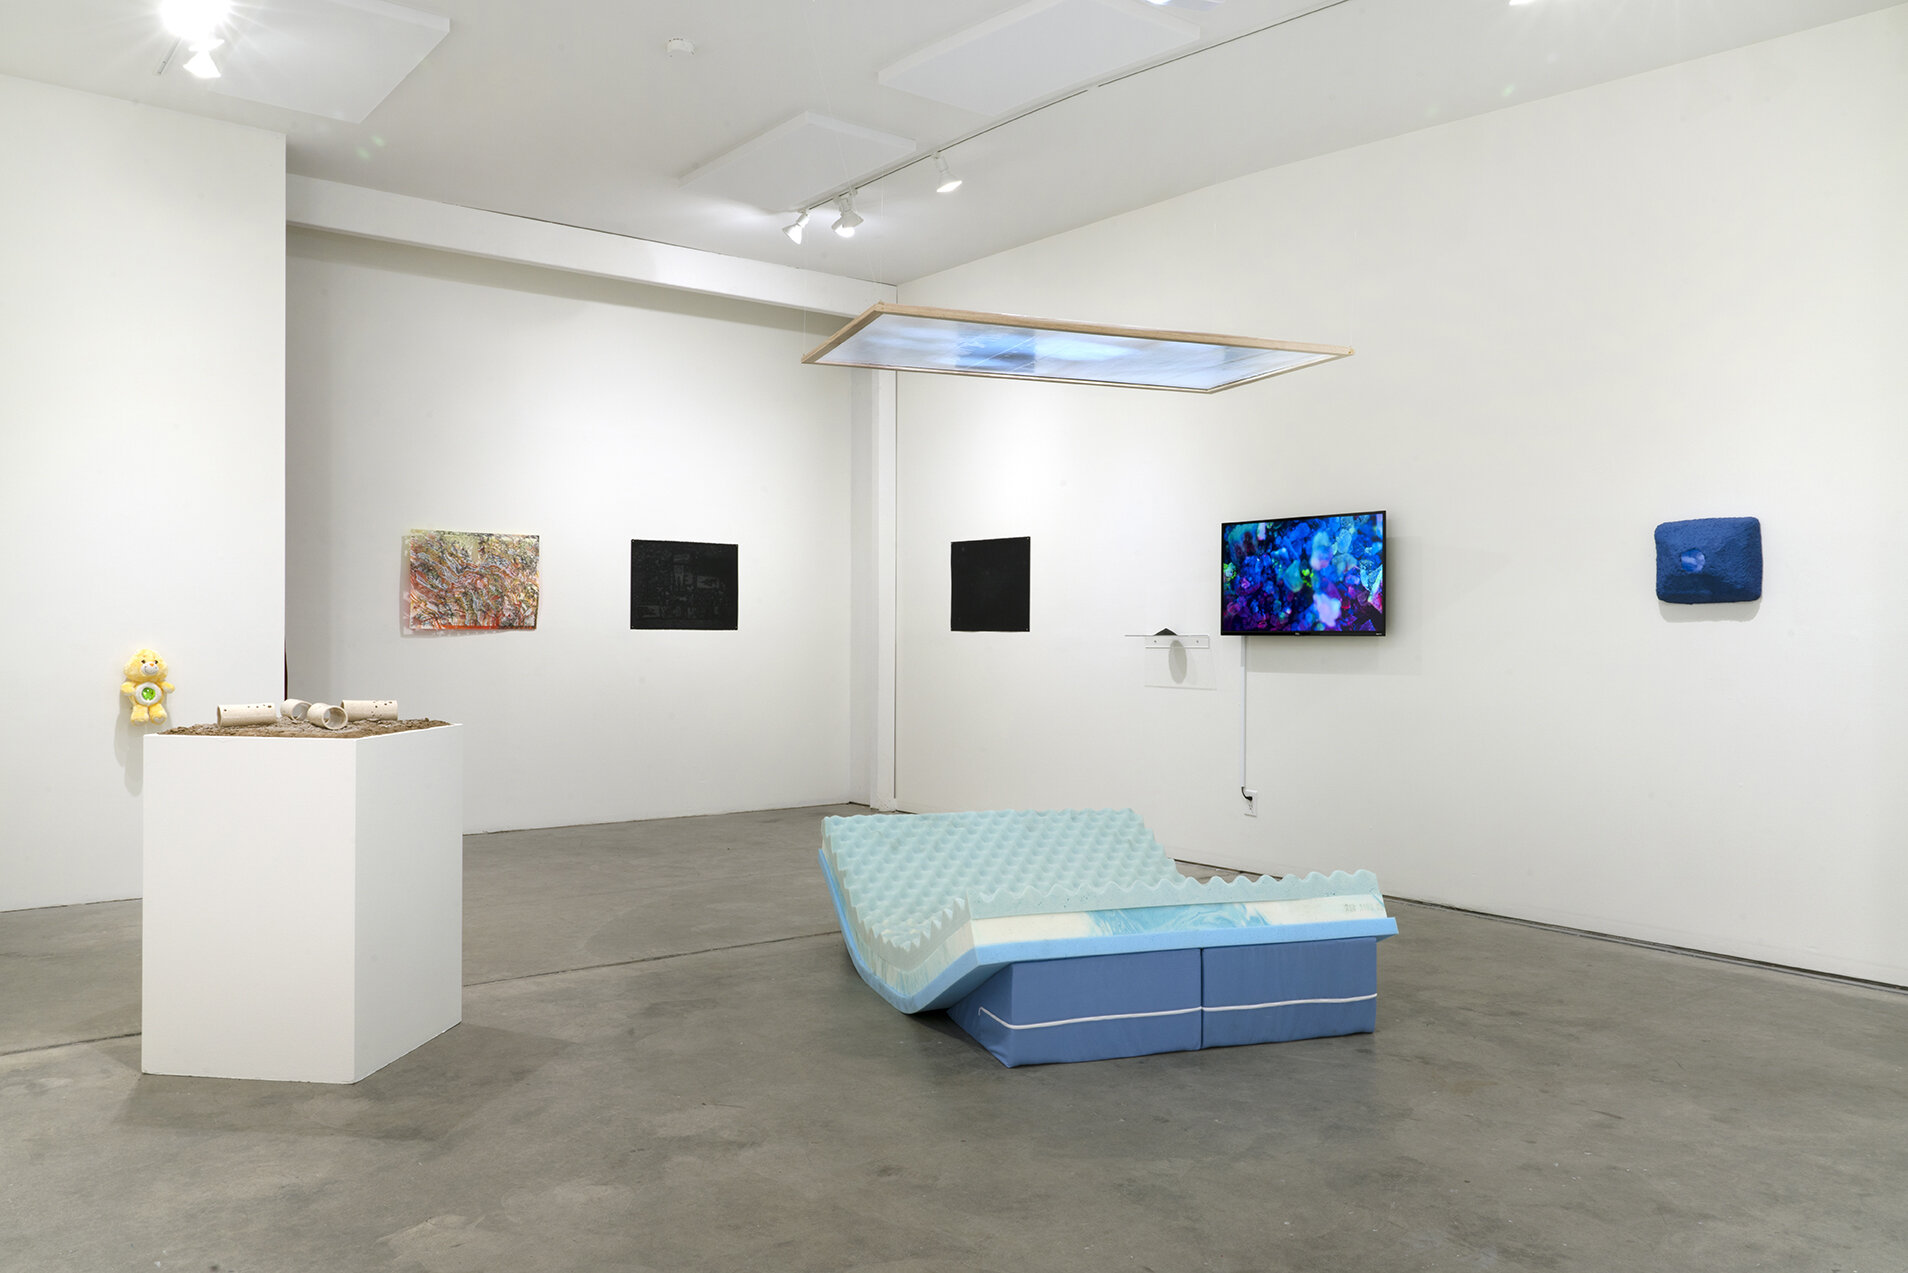  Installation view at Carnation Contemporary in Portland, OR 2021  photo credit: John Whitten 